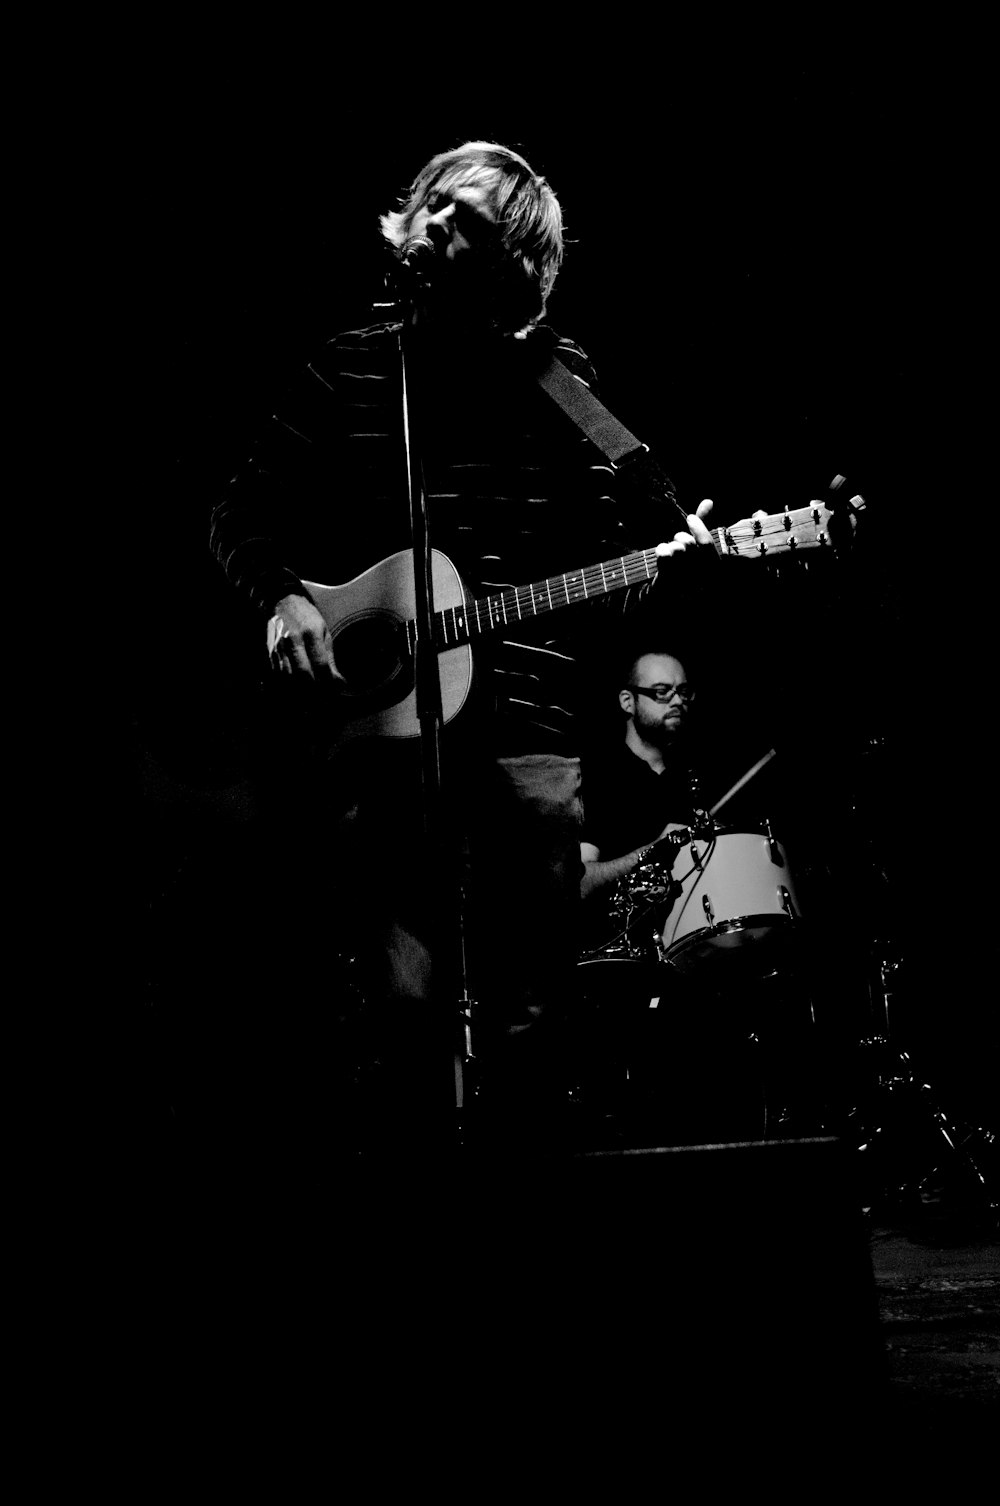 person performing in greyscale photography